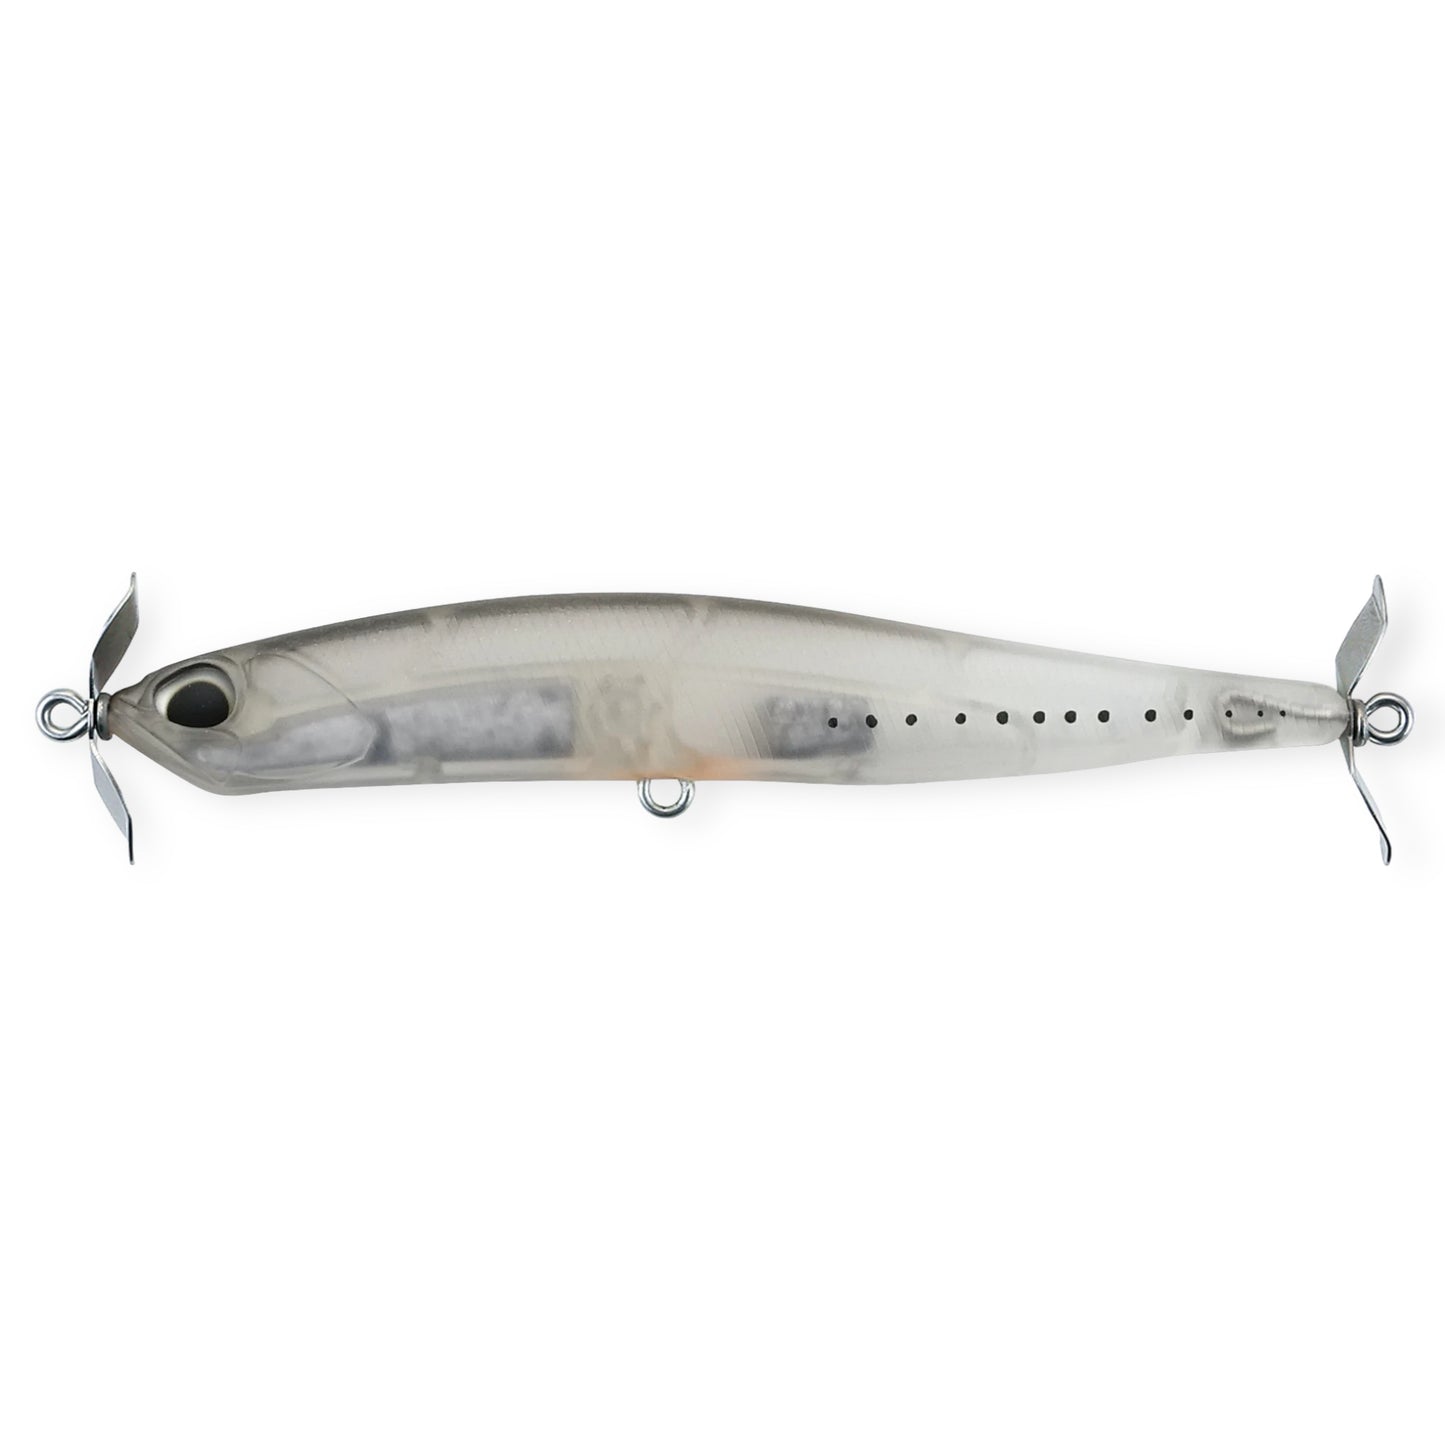 Duo Realis I-Class Series Spinbait 90